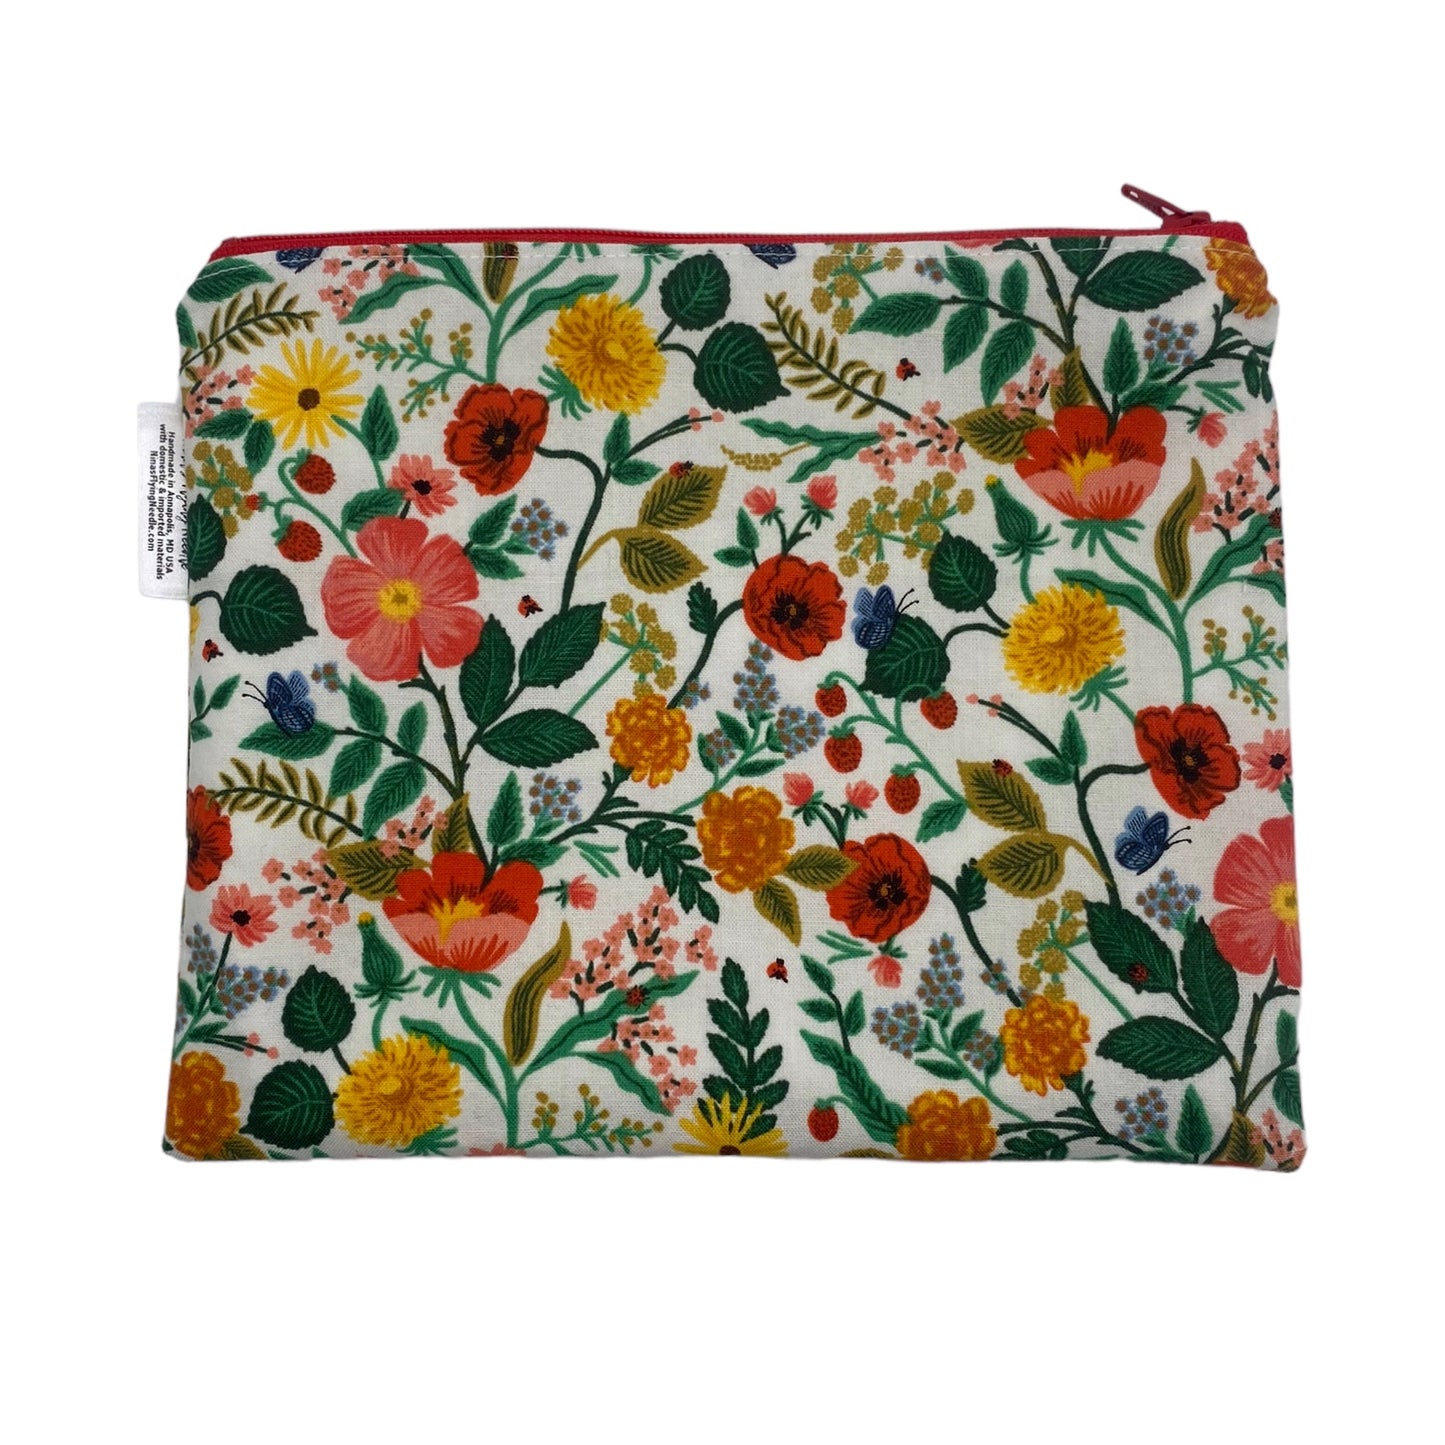 Sandwich Sized Reusable Zippered Bag Floral with Butterflies and Ladybugs